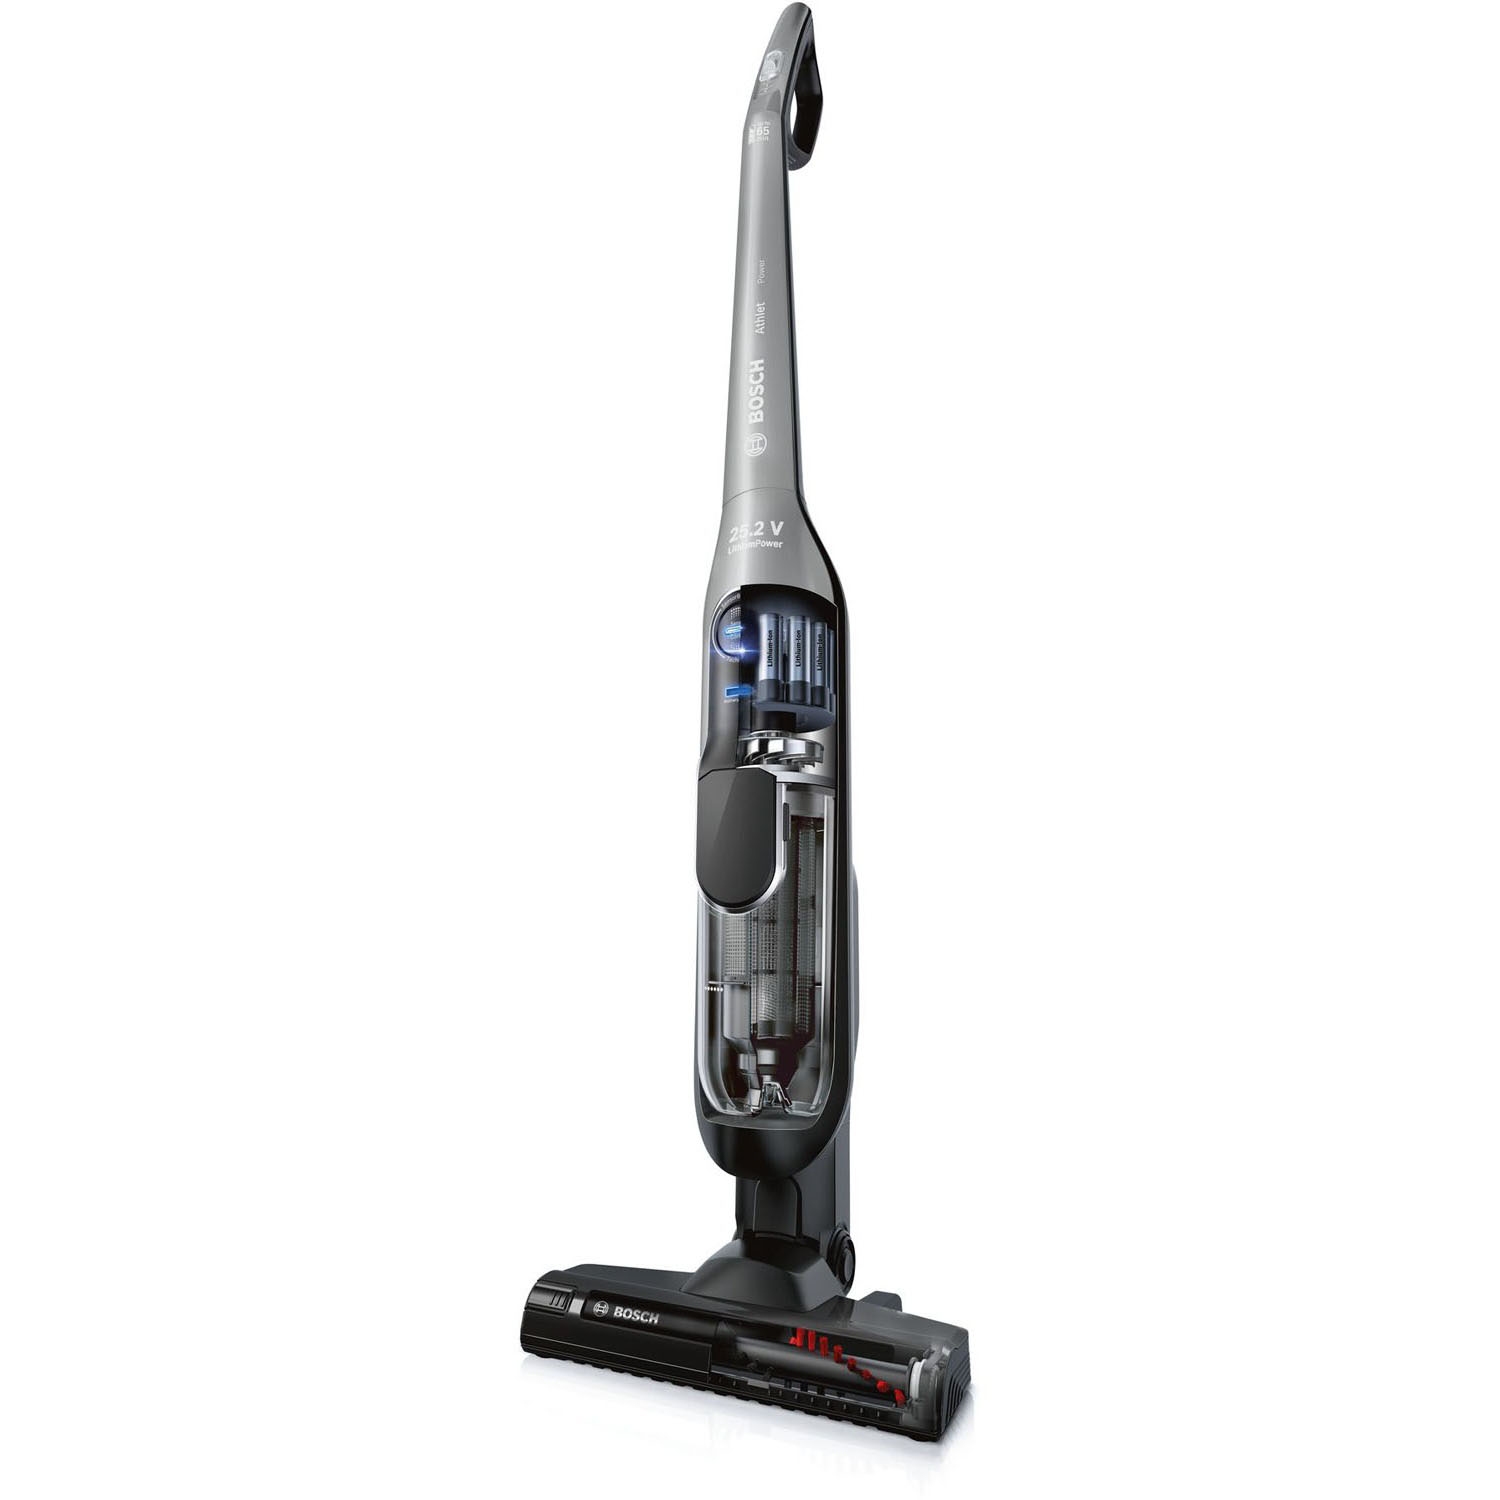 Bosch Athlet Vacuum Cleaner - 65 Minute Run Time - 11